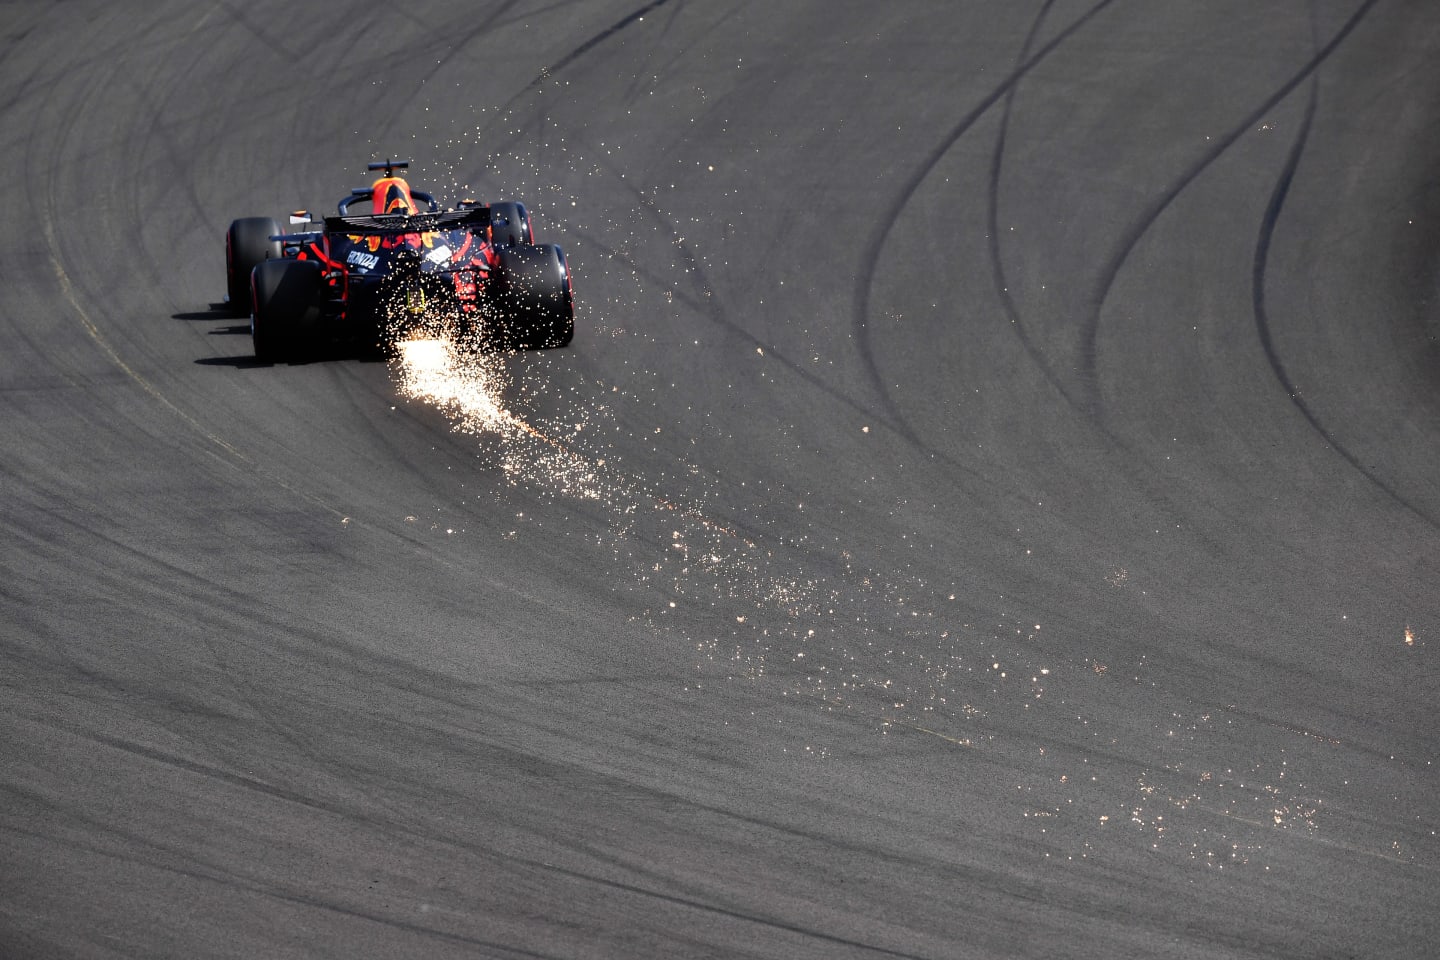 NORTHAMPTON, ENGLAND - AUGUST 08: Max Verstappen of the Netherlands driving the (33) Aston Martin Red Bull Racing RB16 on track during qualifying for the F1 70th Anniversary Grand Prix at Silverstone on August 08, 2020 in Northampton, England. (Photo by Ben Stansall/Pool via Getty Images)